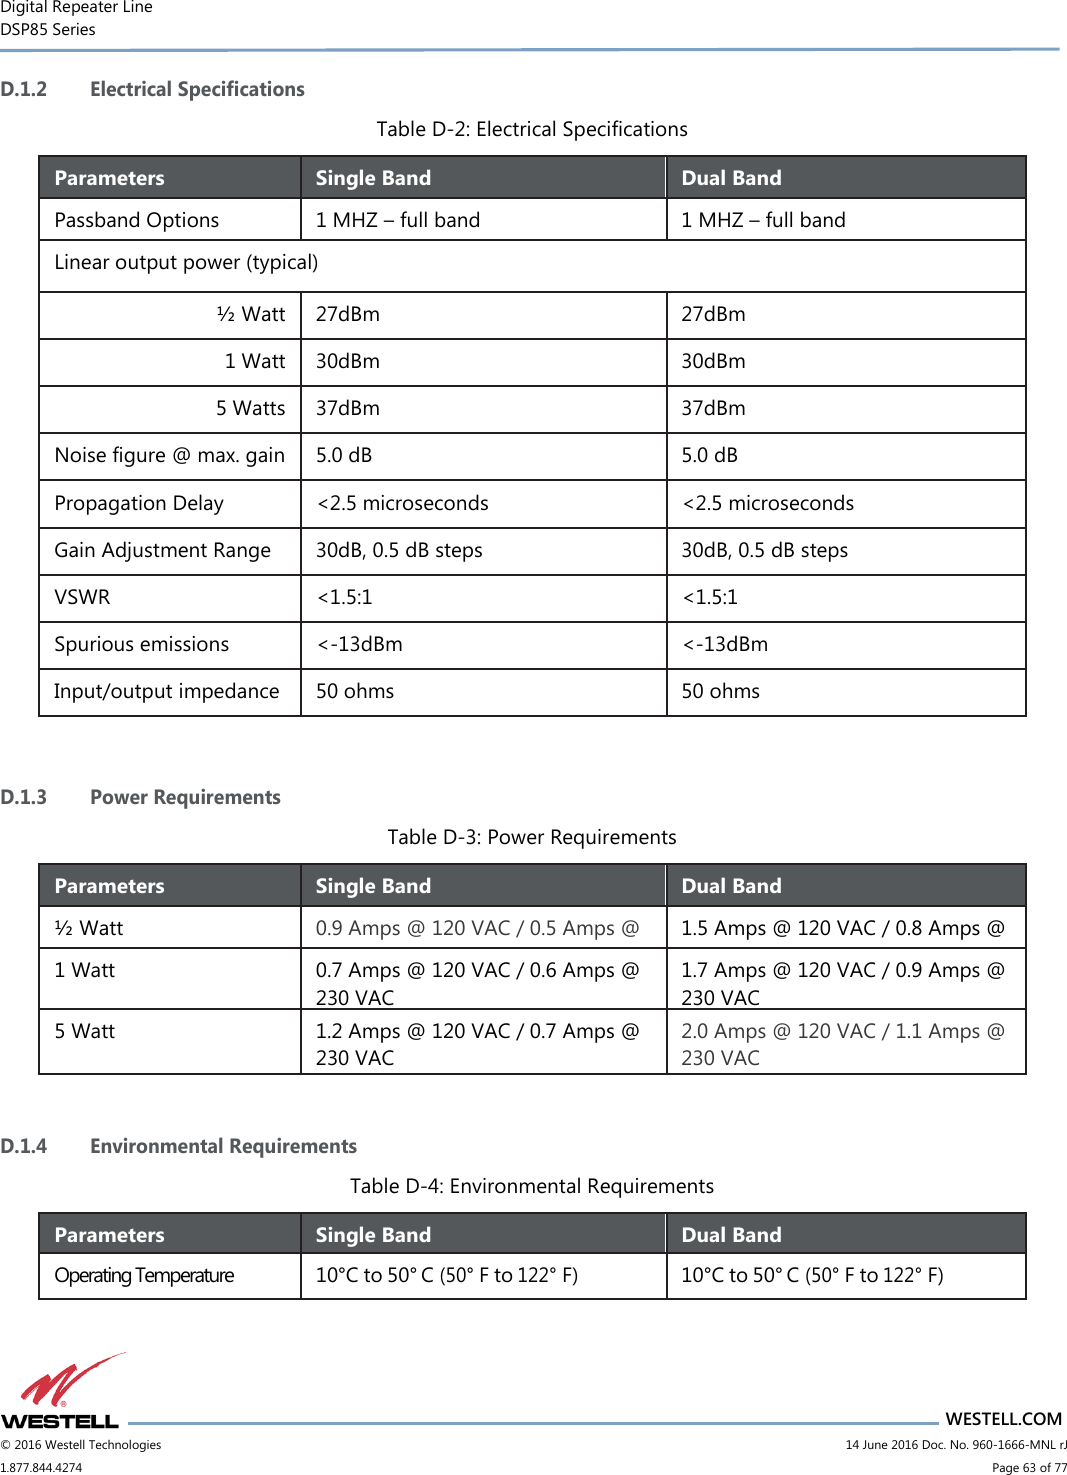 Digital Repeater Line DSP85 Series                       WESTELL.COM © 2016 Westell Technologies                         14 June 2016 Doc. No. 960-1666-MNL rJ 1.877.844.4274                             Page 63 of 77  D.1.2 Electrical Specifications Table D-2: Electrical Specifications Parameters Single Band Dual Band Passband Options 1 MHZ – full band 1 MHZ – full band Linear output power (typical) ½ Watt 27dBm 27dBm 1 Watt 30dBm 30dBm 5 Watts 37dBm 37dBm Noise figure @ max. gain 5.0 dB 5.0 dB Propagation Delay &lt;2.5 microseconds &lt;2.5 microseconds Gain Adjustment Range 30dB, 0.5 dB steps 30dB, 0.5 dB steps VSWR &lt;1.5:1 &lt;1.5:1 Spurious emissions &lt;-13dBm &lt;-13dBm Input/output impedance 50 ohms 50 ohms  D.1.3 Power Requirements Table D-3: Power Requirements Parameters Single Band Dual Band ½ Watt 0.9 Amps @ 120 VAC / 0.5 Amps @ 230 VAC 1.5 Amps @ 120 VAC / 0.8 Amps @ 230 VAC 1 Watt 0.7 Amps @ 120 VAC / 0.6 Amps @ 230 VAC 1.7 Amps @ 120 VAC / 0.9 Amps @ 230 VAC 5 Watt 1.2 Amps @ 120 VAC / 0.7 Amps @ 230 VAC 2.0 Amps @ 120 VAC / 1.1 Amps @ 230 VAC  D.1.4 Environmental Requirements Table D-4: Environmental Requirements Parameters Single Band Dual Band Operating Temperature 10°C to 50° C (50° F to 122° F) 10°C to 50° C (50° F to 122° F)   